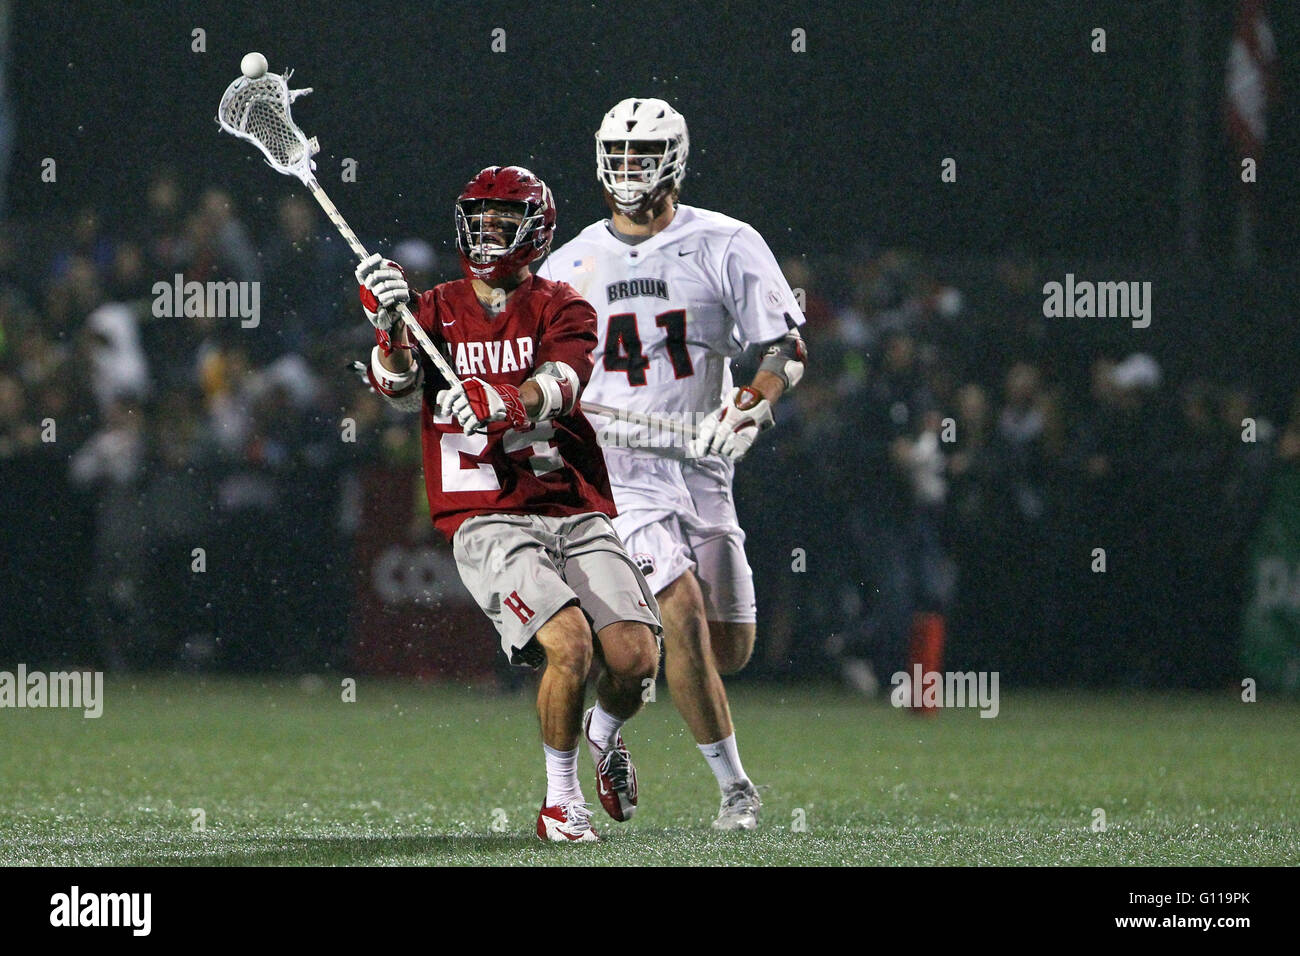 Stevenson-Pincince Field. 6th May, 2016. RI, USA; Harvard Crimson midfielder Ian Ardrey (21) is pursued by Brown Bears midfielder Brendan Caputo (41) during the second half of the NCAA Ivy League Tournament Lacrosse game between Harvard Crimson and Brown Bears at Stevenson-Pincince Field. Harvard defeated Brown 13-12. Anthony Nesmith/Cal Sport Media/Alamy Live News Stock Photo